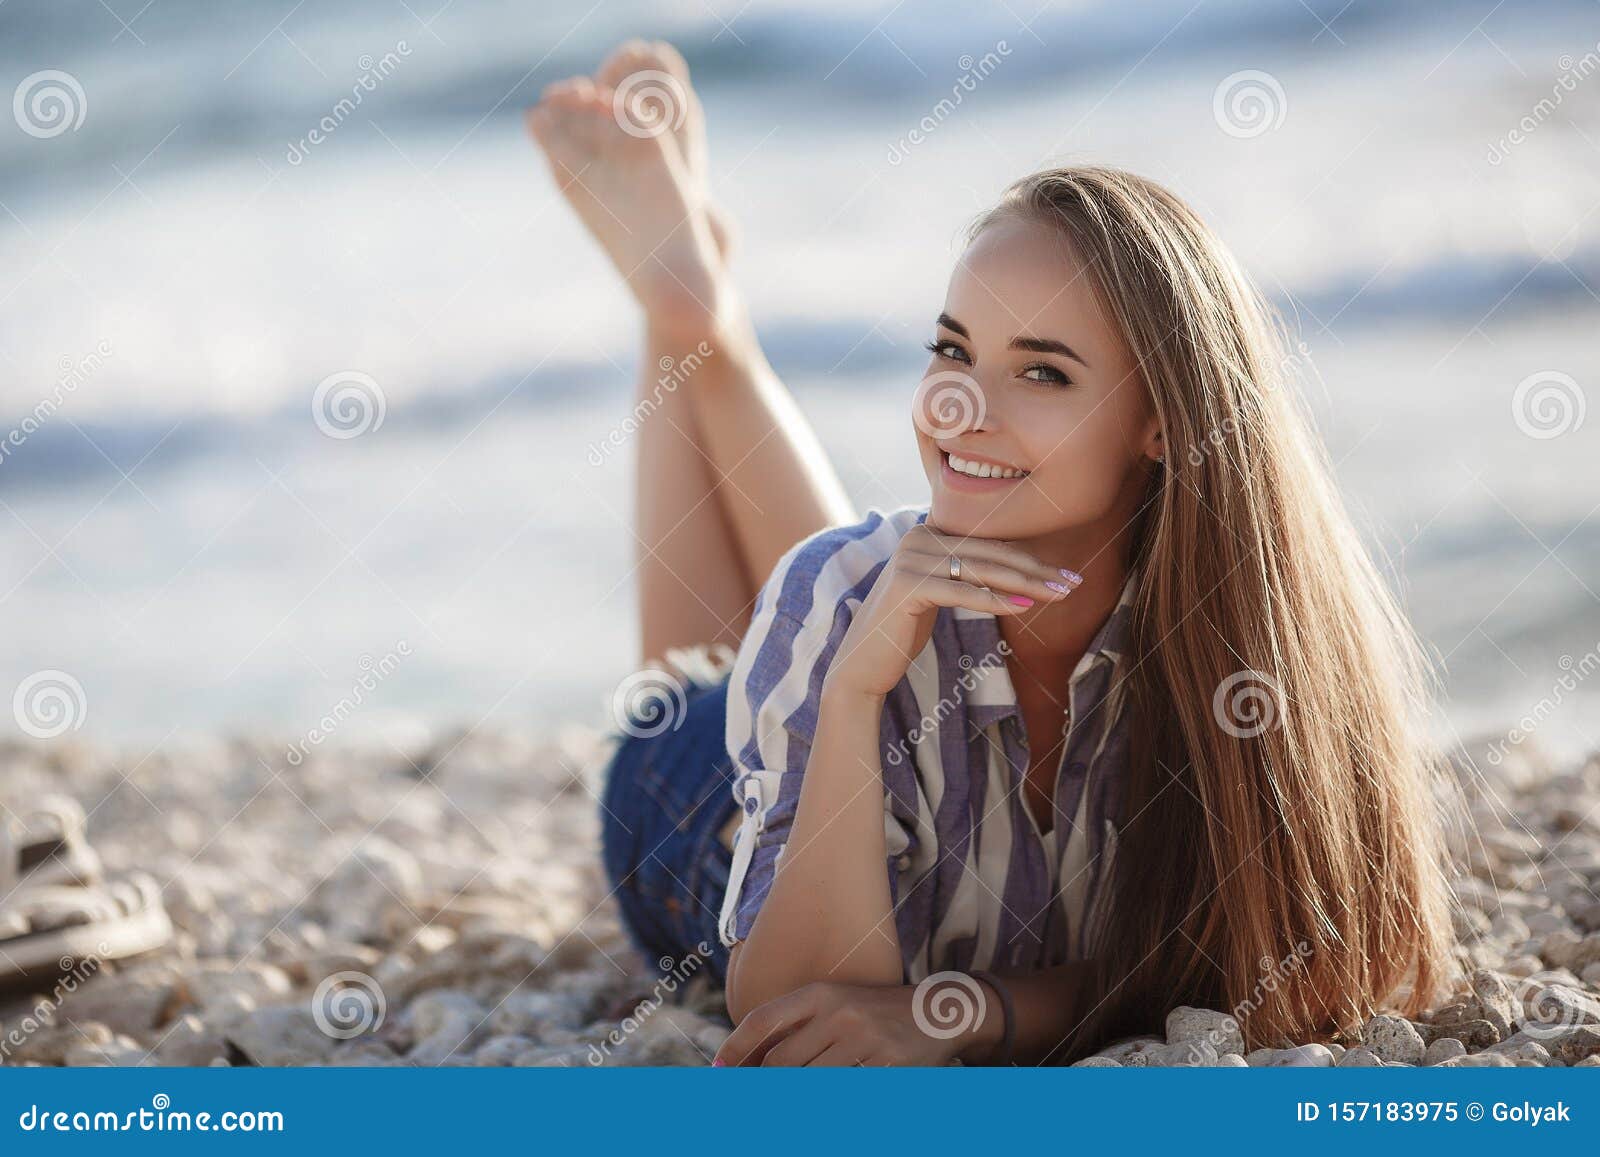 A Beautiful Young Woman With Long Straight Hair Sits Alone On Stones By The Sea Stock Image 